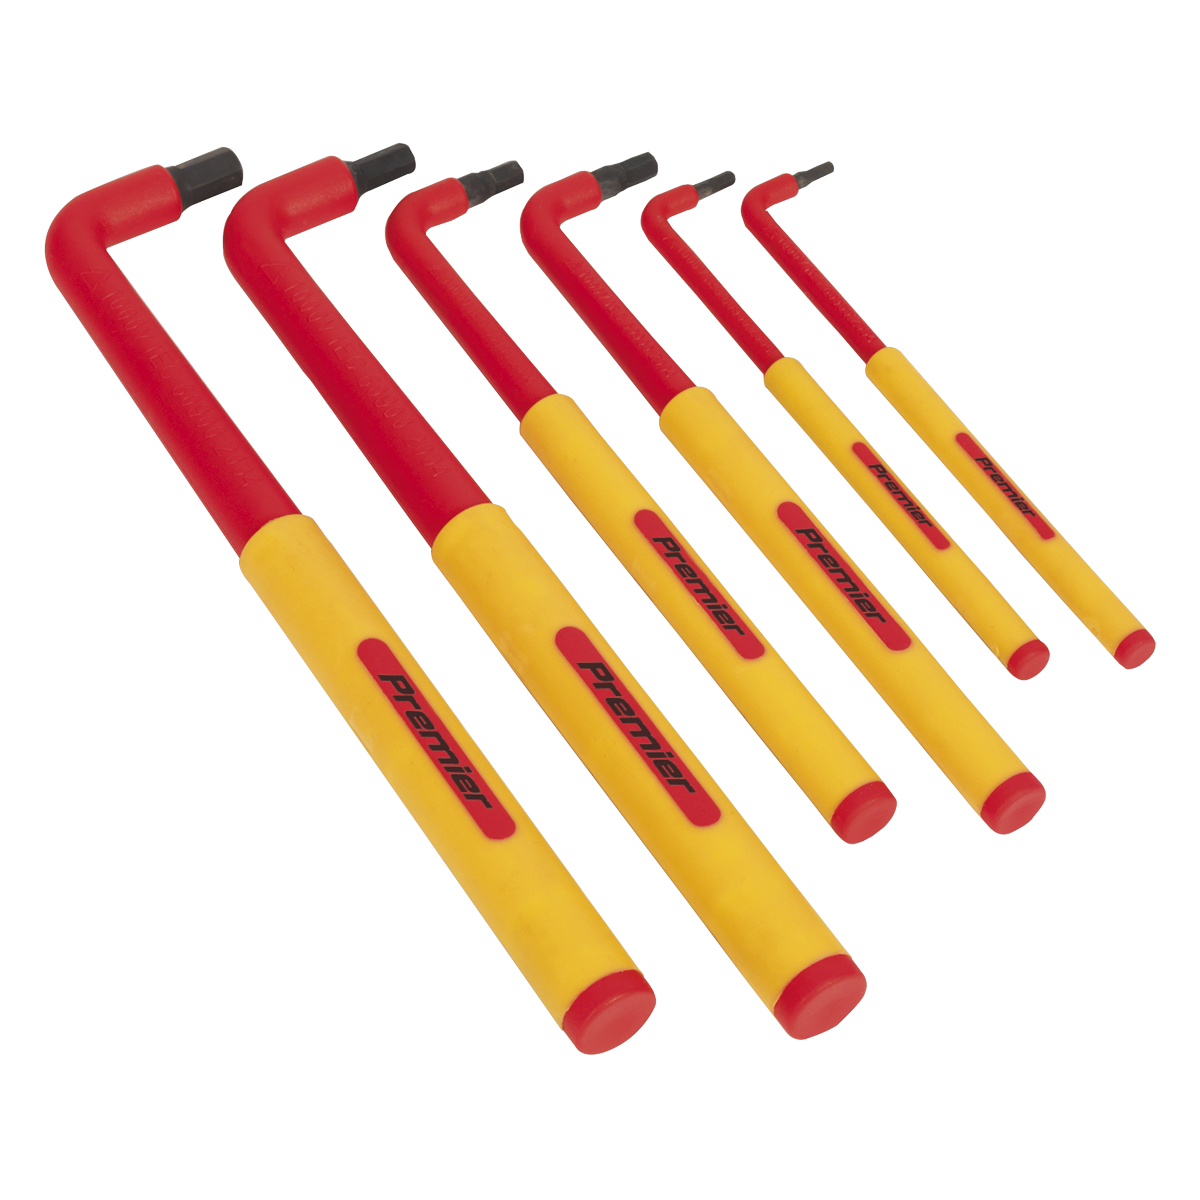 Sealey 6pc Extra-Long Hex Key Set - VDE Approved AK7177